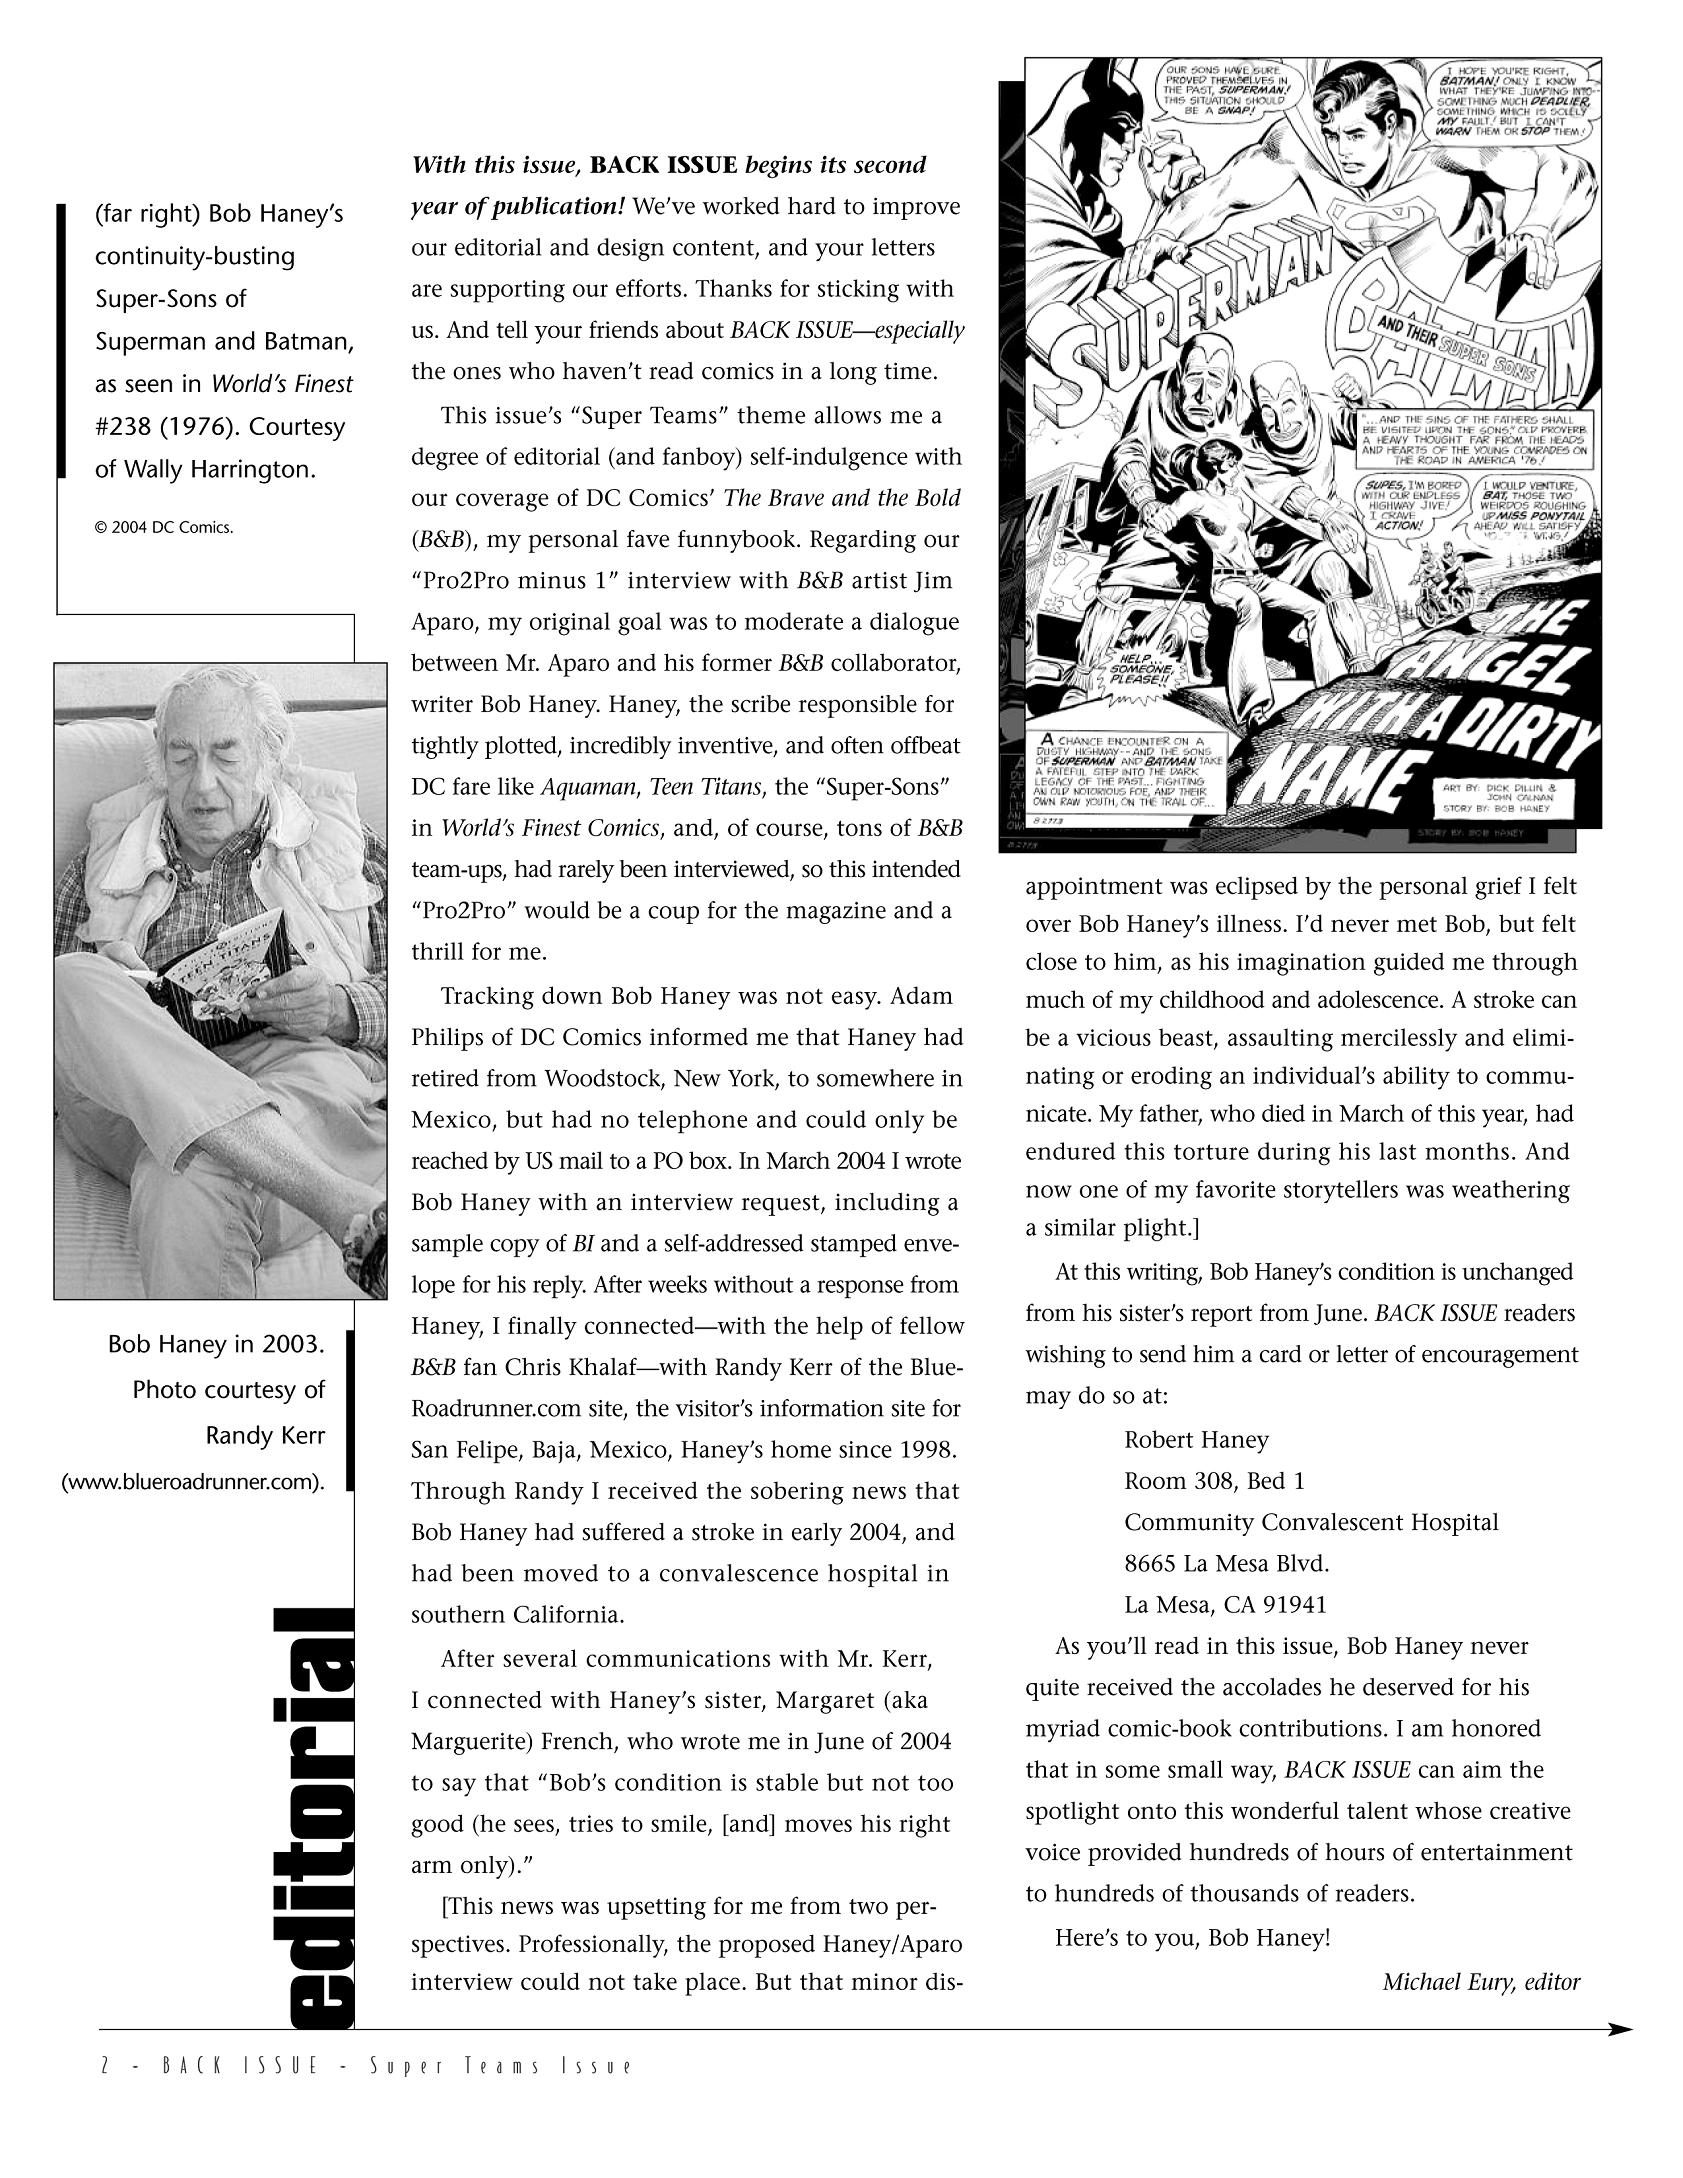 Read online Back Issue comic -  Issue #7 - 3